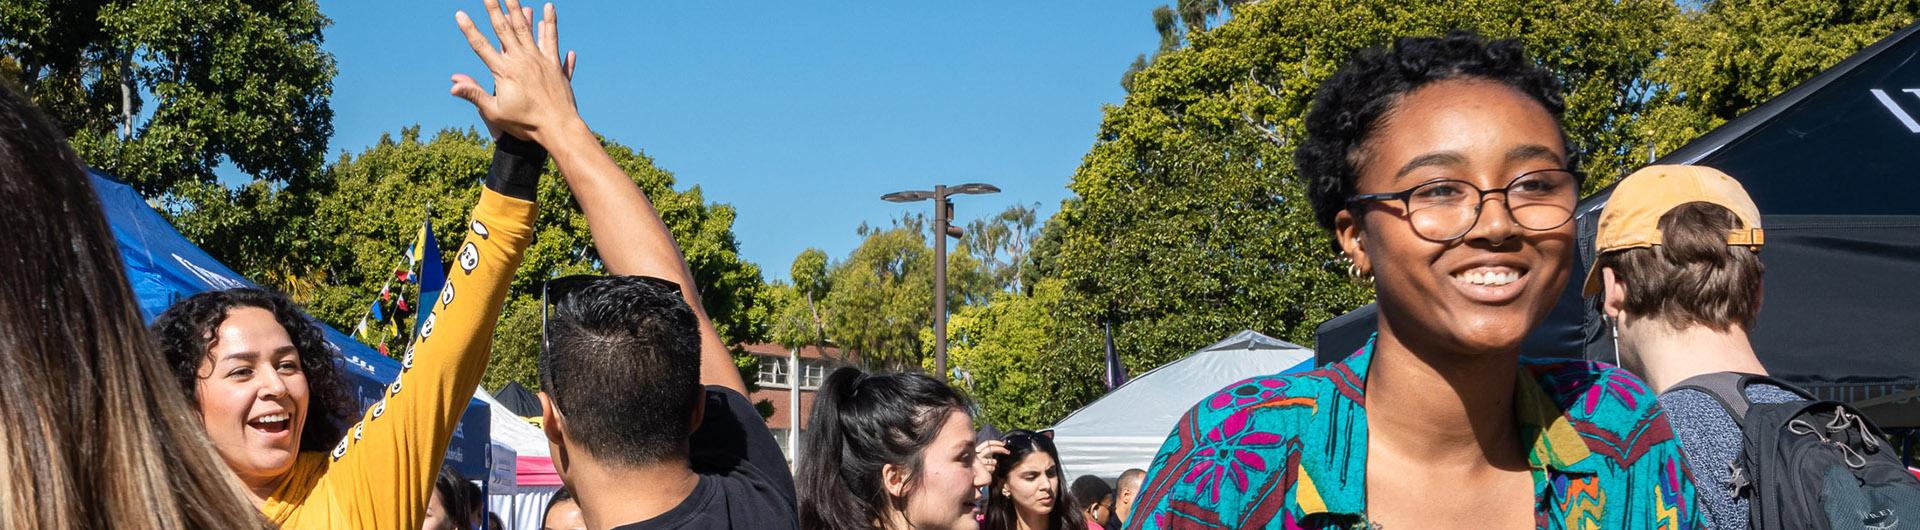 CSULB students smile and high five on campus